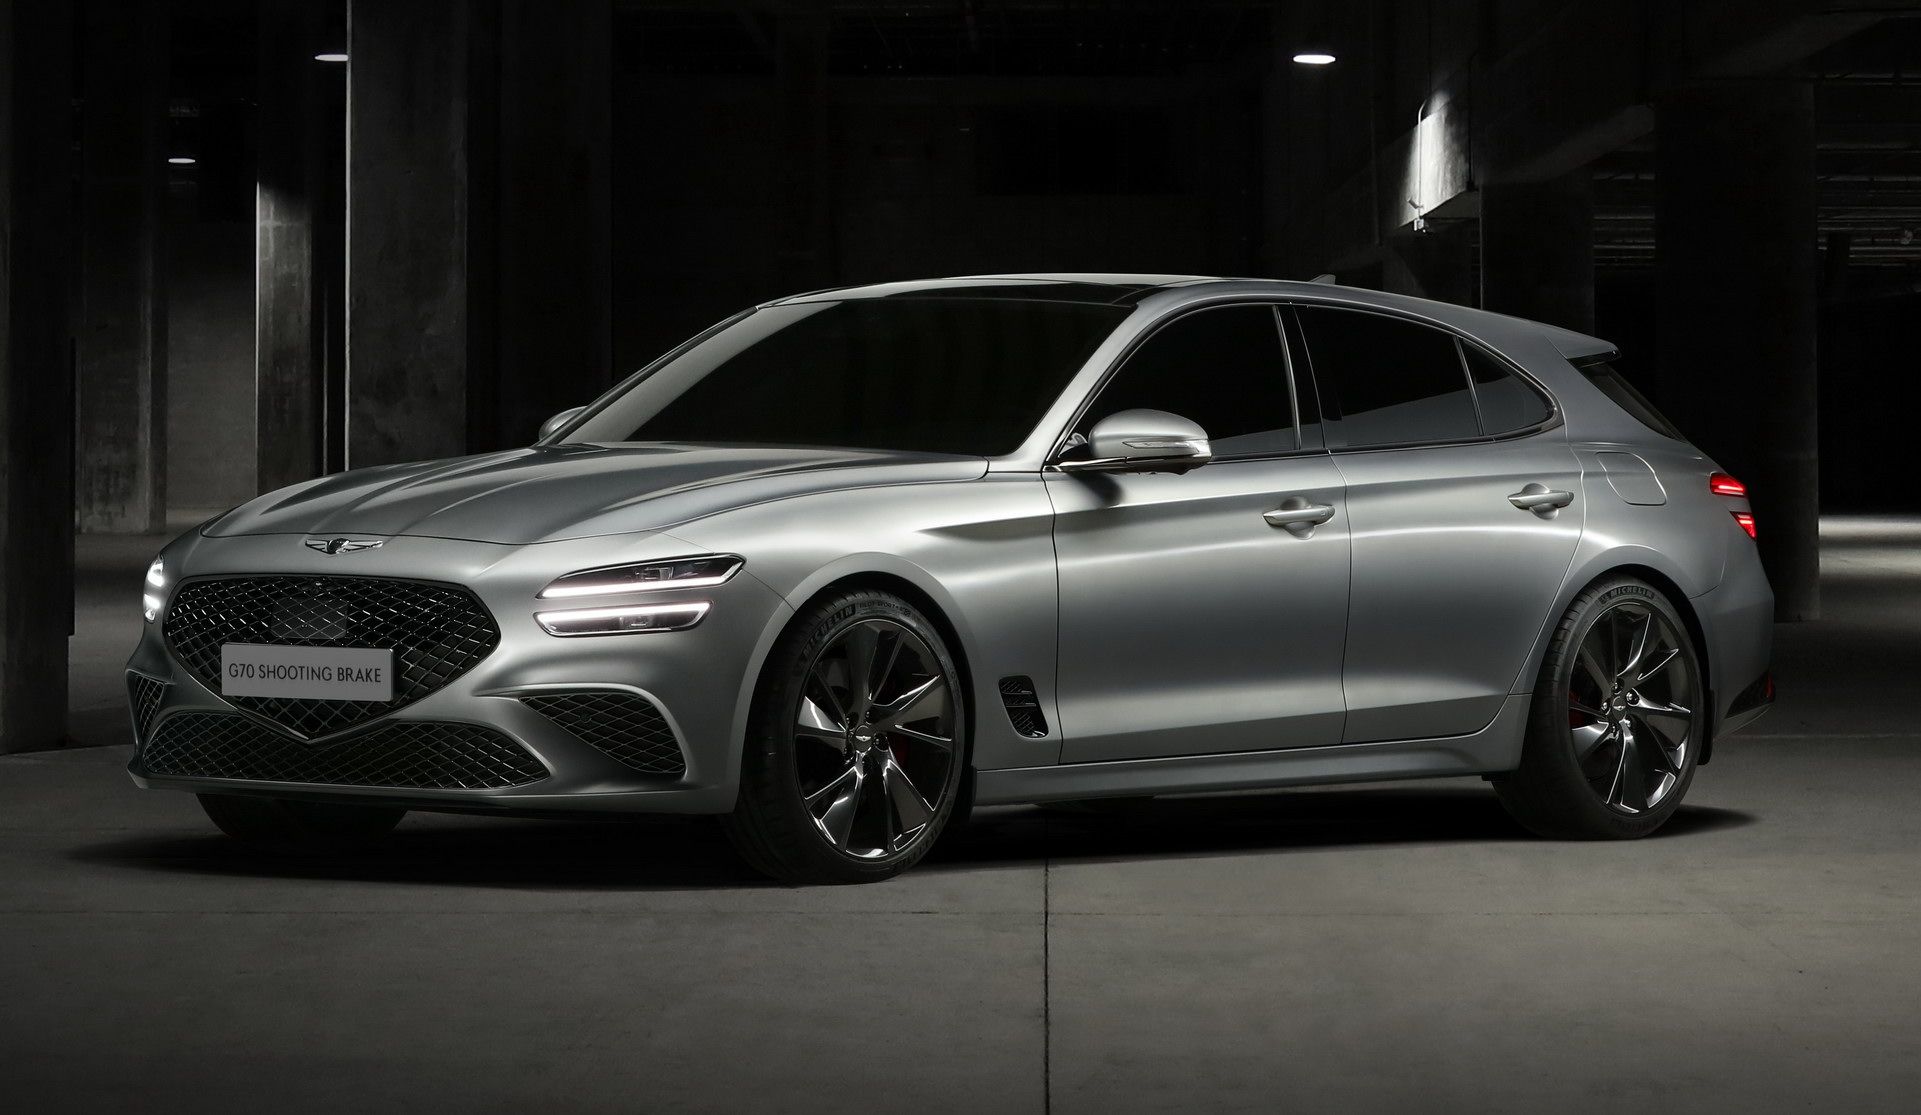 2021 The Genesis G70 Shooting Brake Is A Tasty Piece of Forbidden Fruit